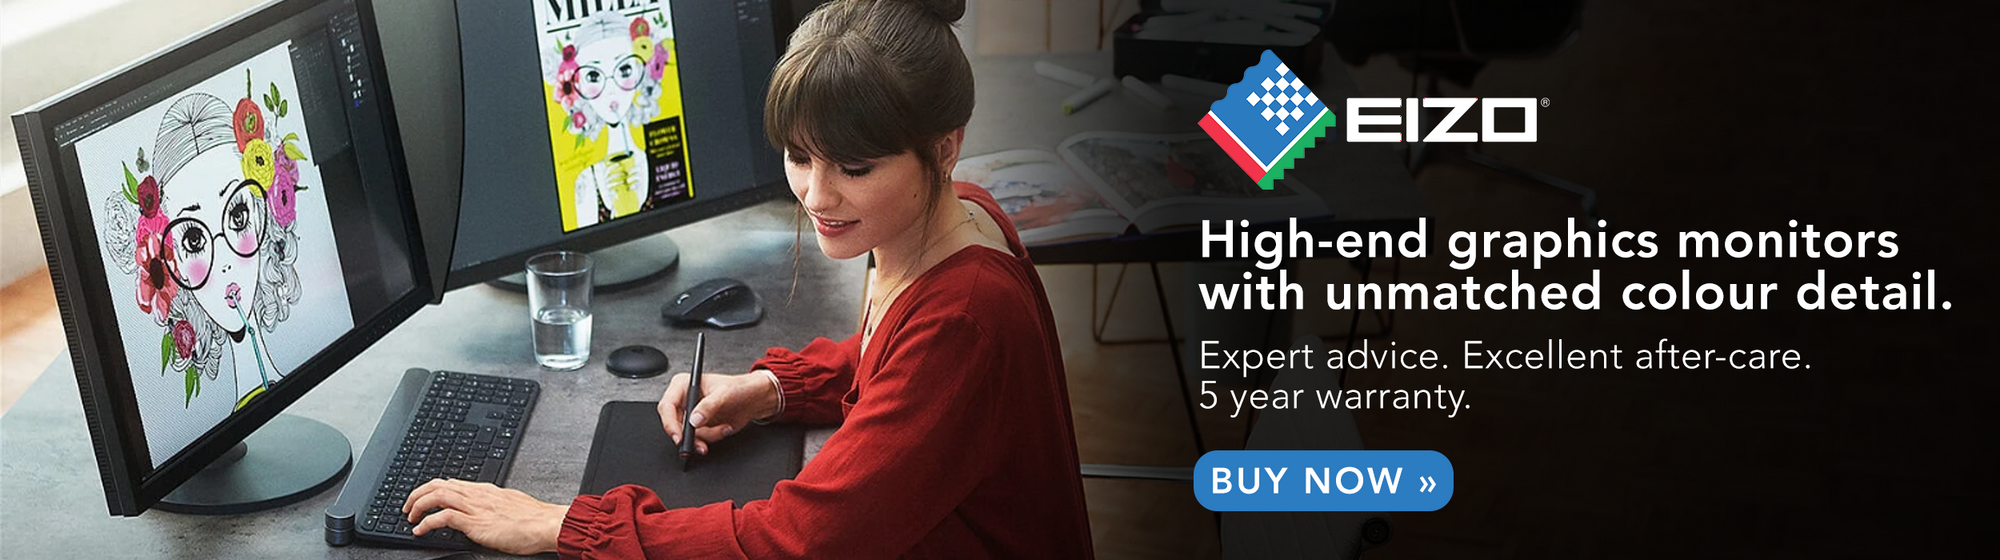 A banner about the EIZO brand showing the EIZO logo and a woman working with a graphics tablet with a dual-monitor set up designing illustrations. The text on the banner reads "EIZO. High-end graphics monitors with unmatched colour detail. Expert advice. Excellent after-care. 5 year warranty. Buy now".